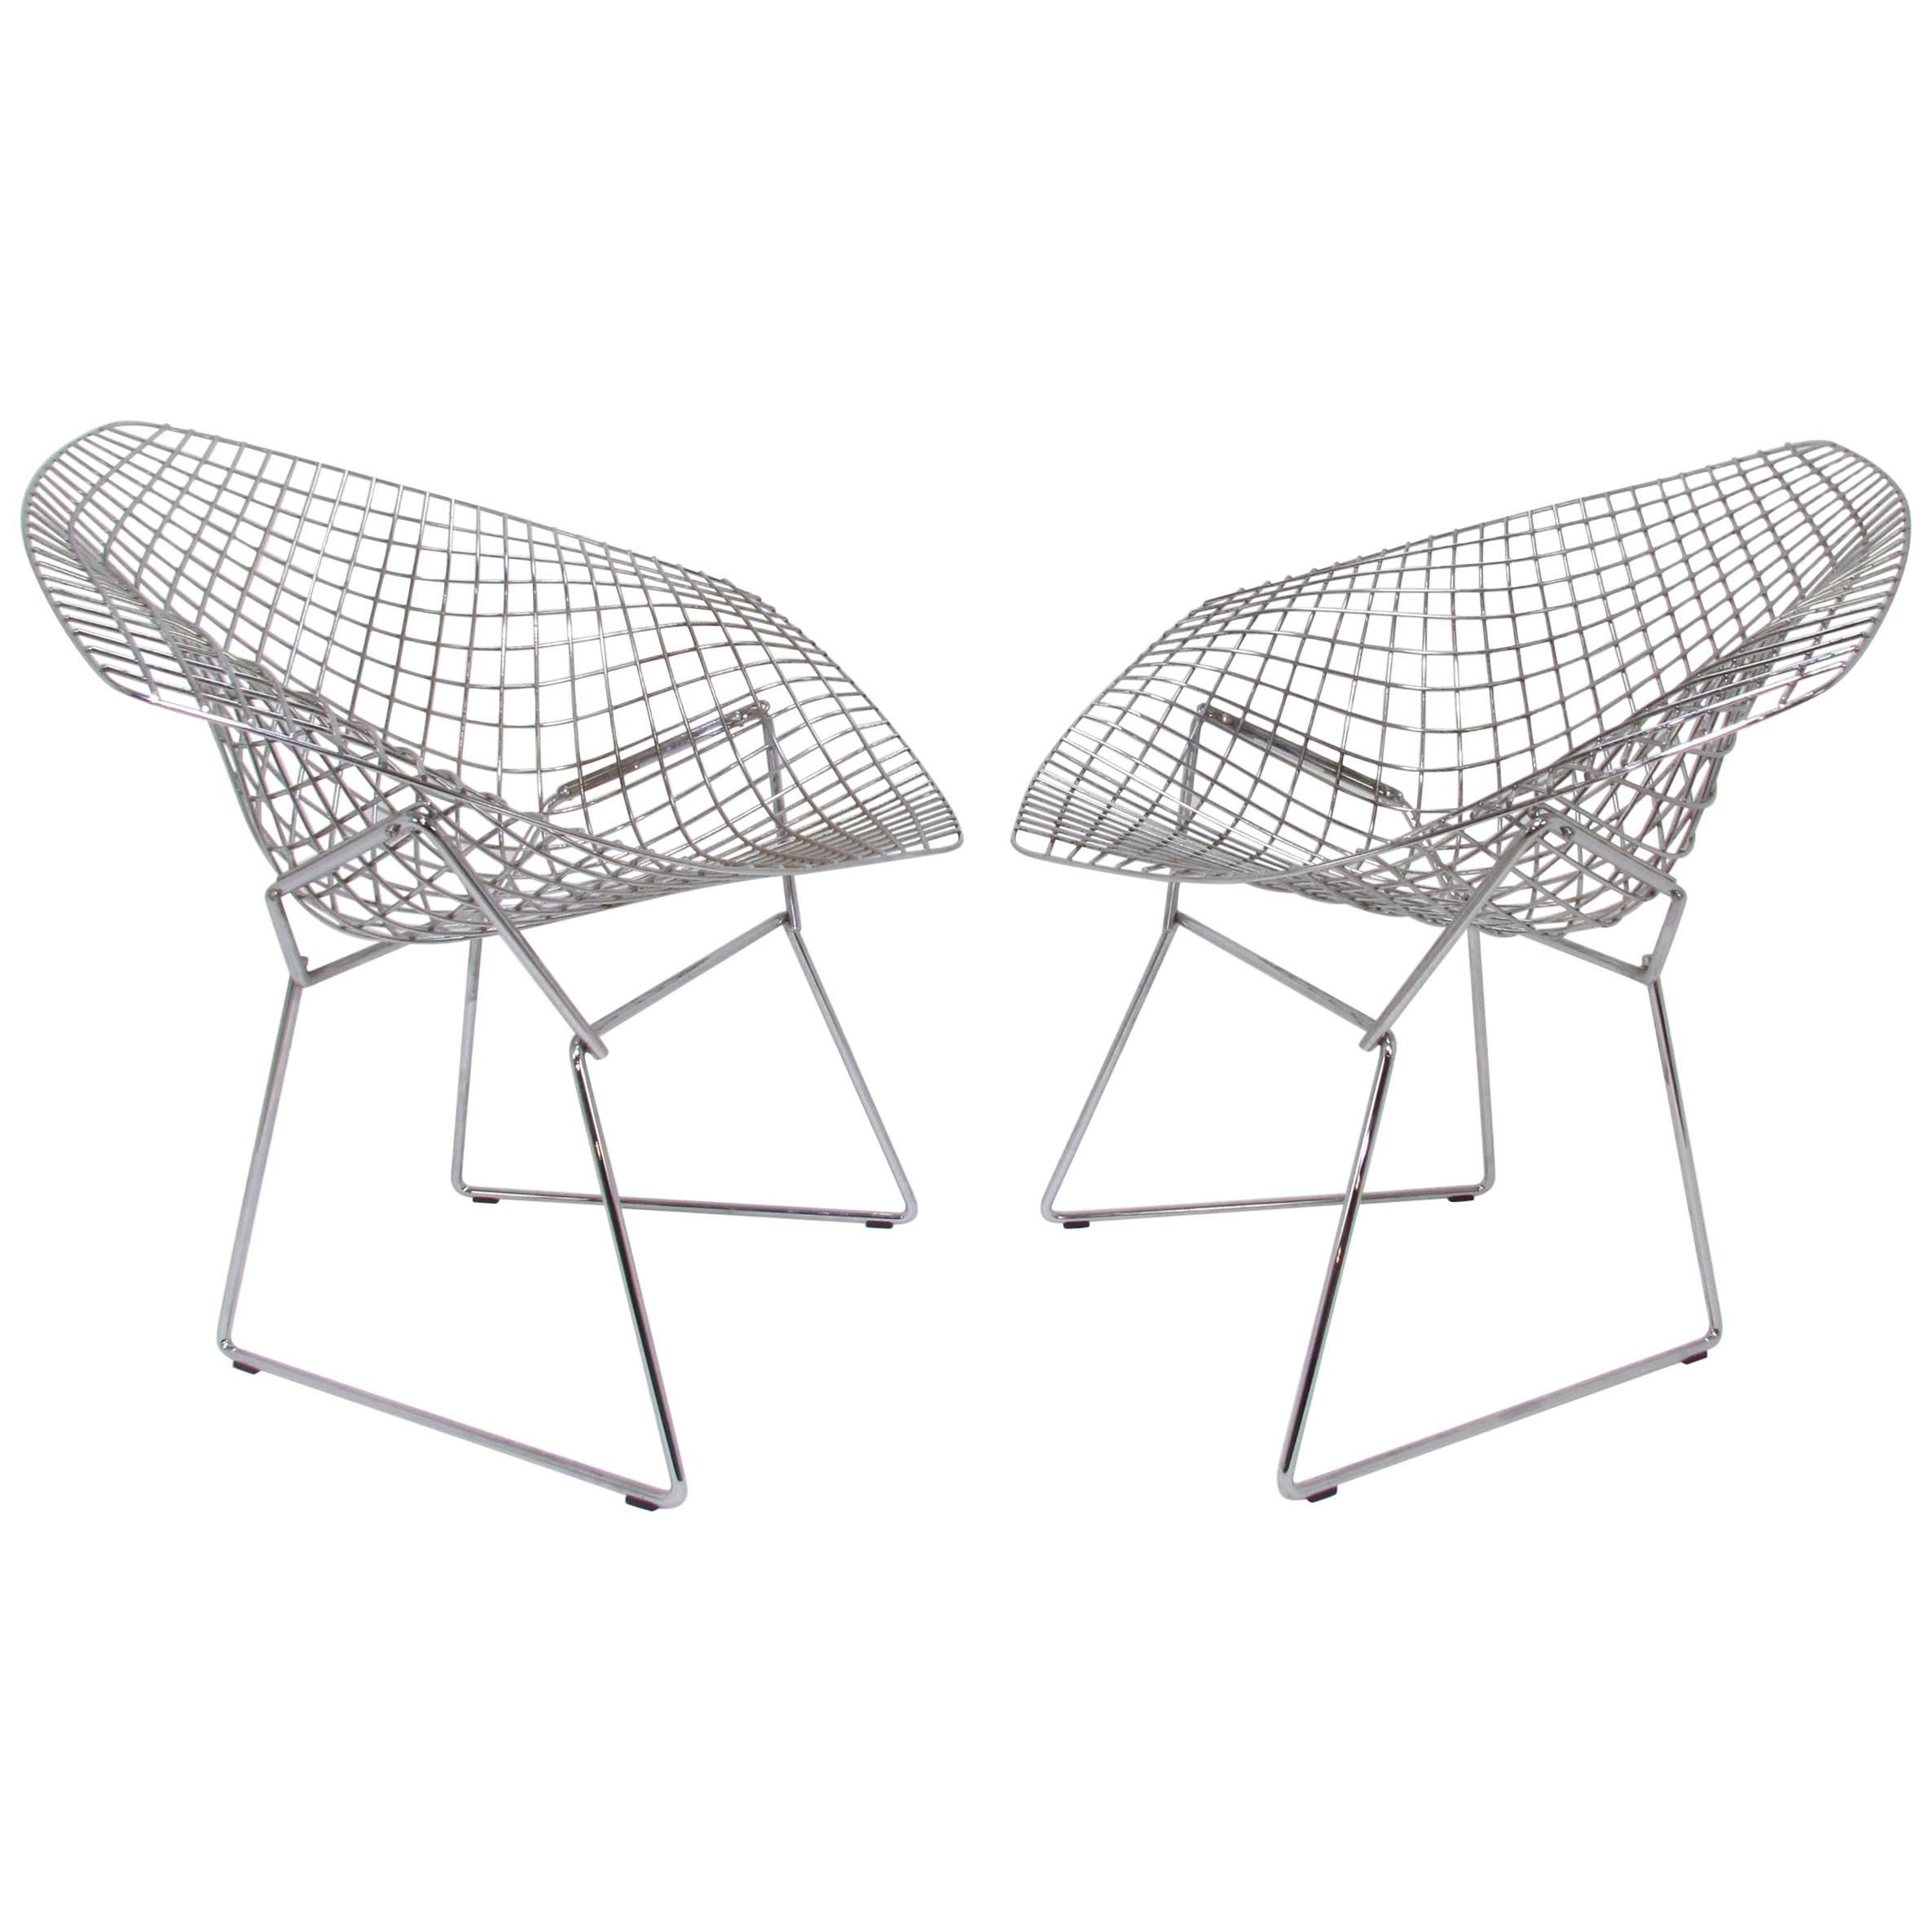 Pair of Signed Knoll Bertoia Diamond Chairs in Stainless Steel